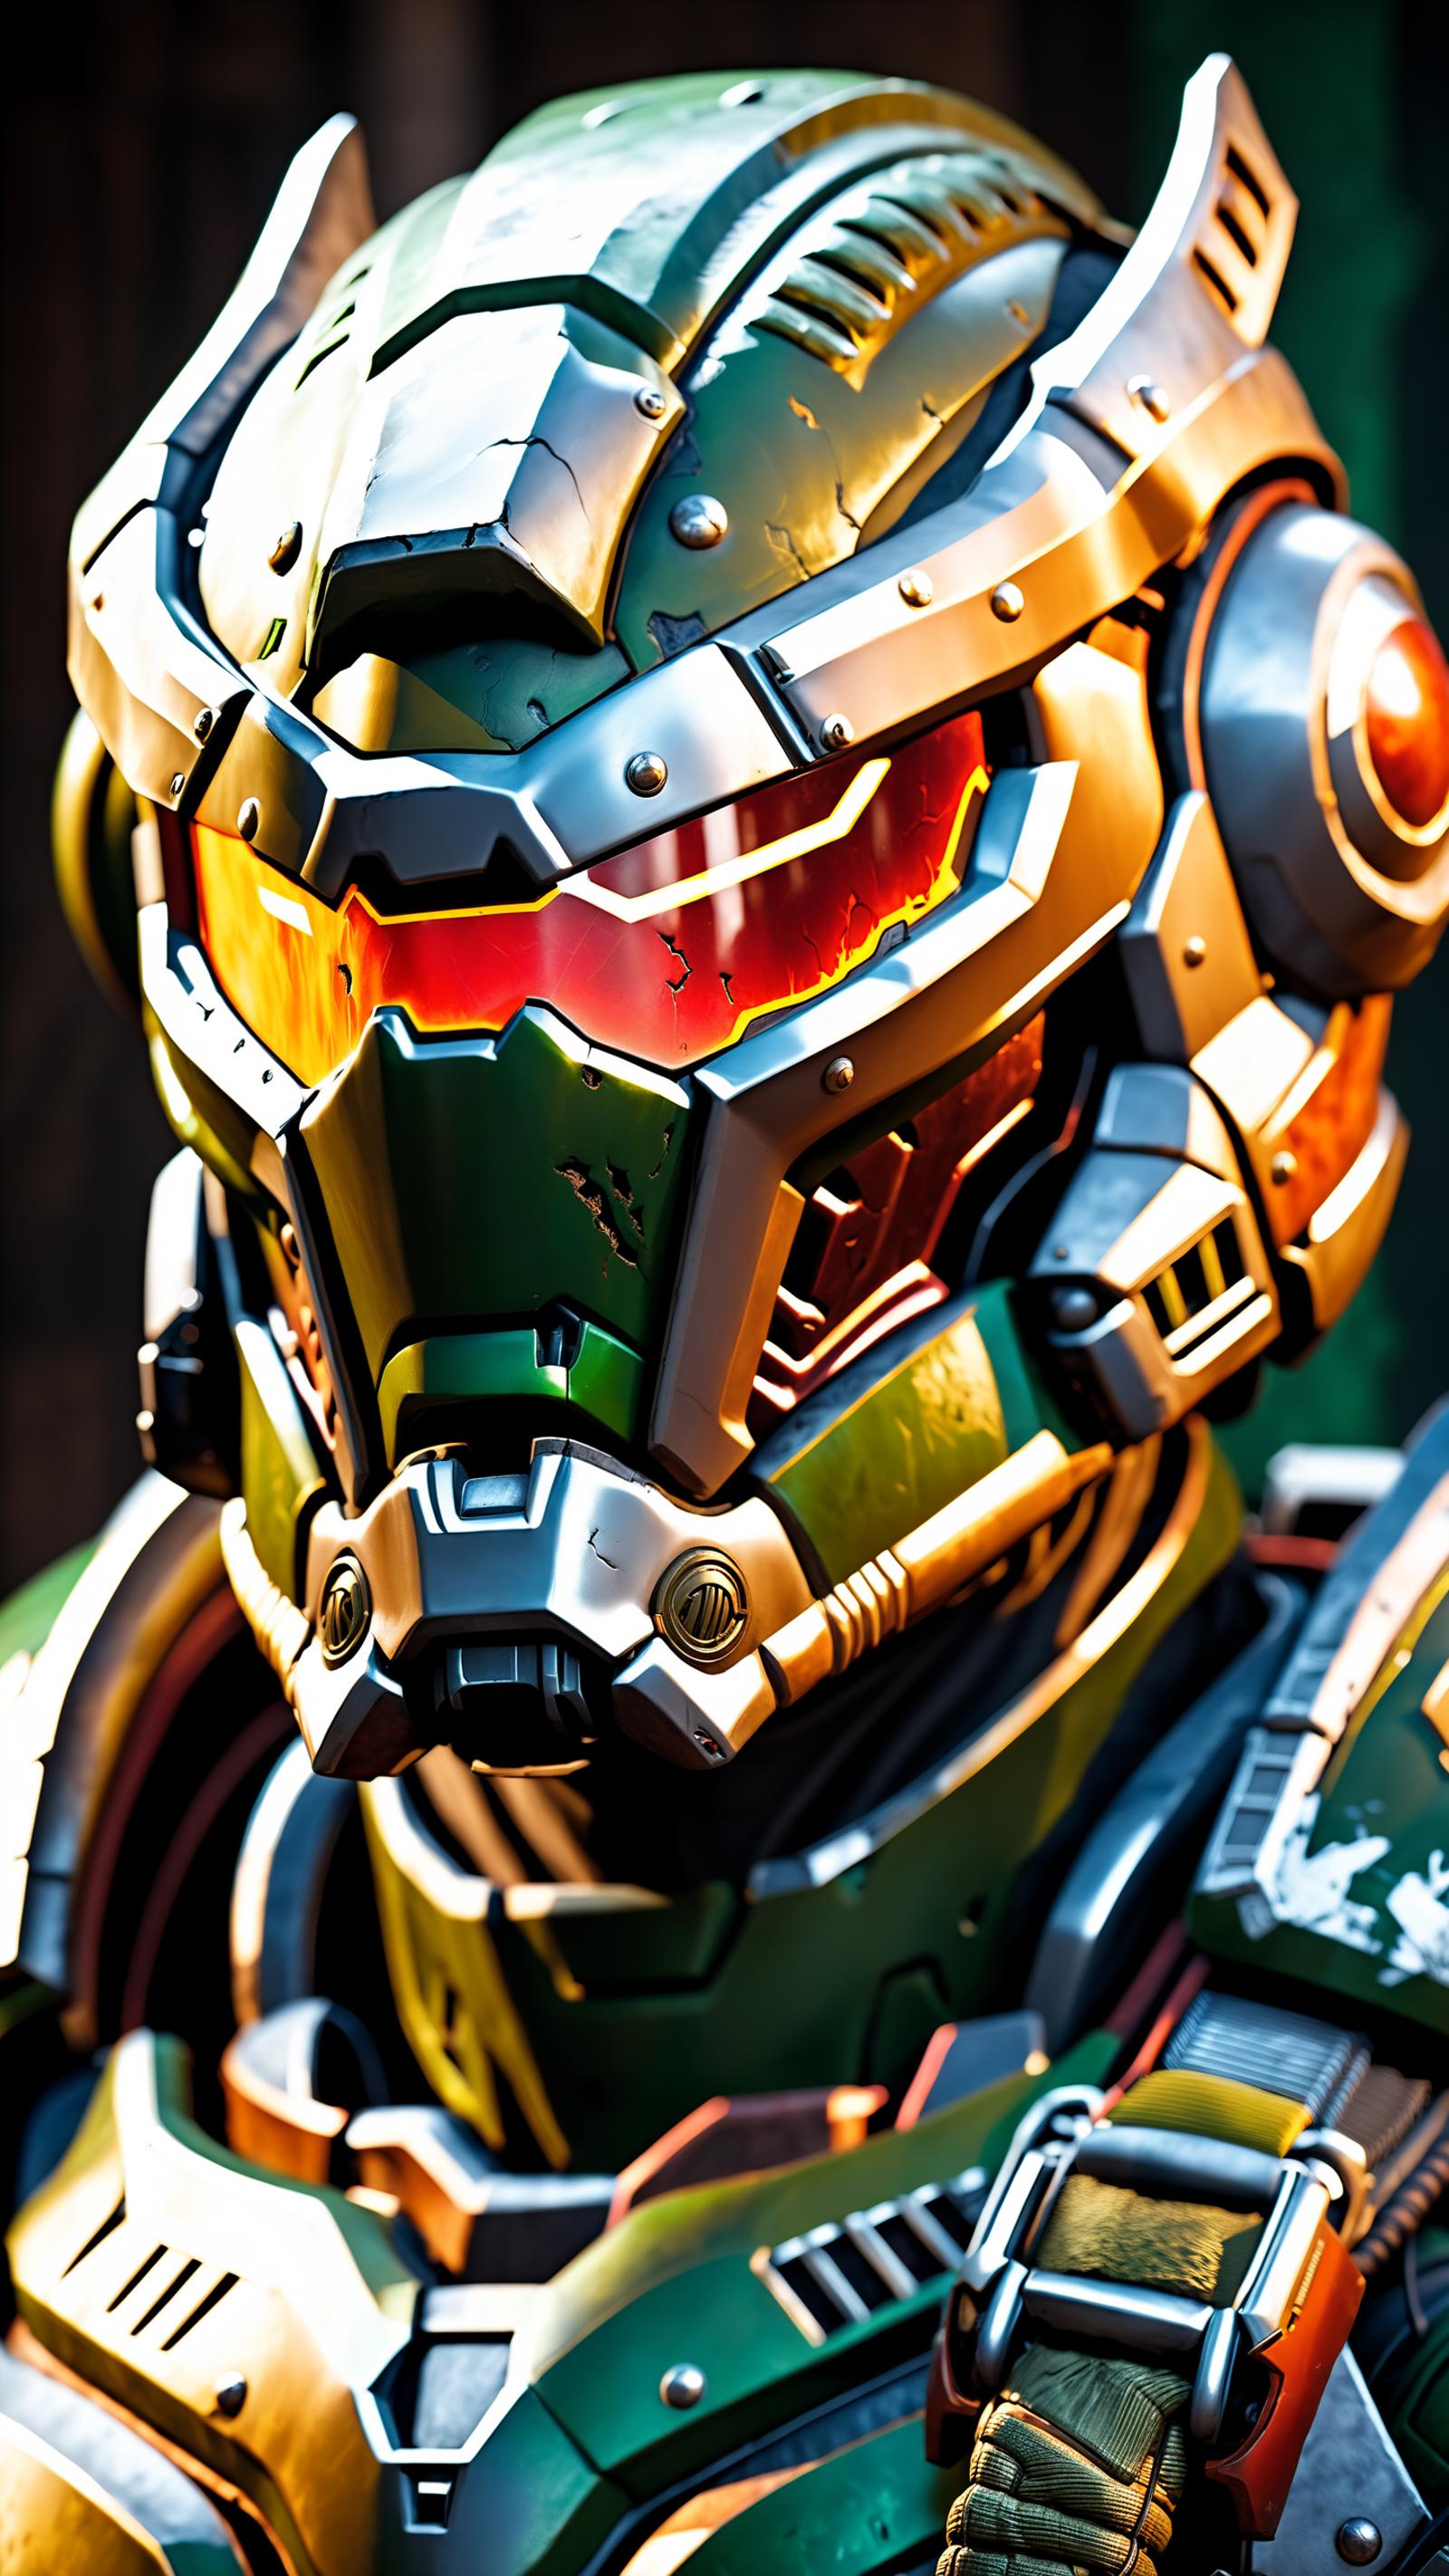 A 3D animated image of a robot wearing a green and silver helmet with a visor.